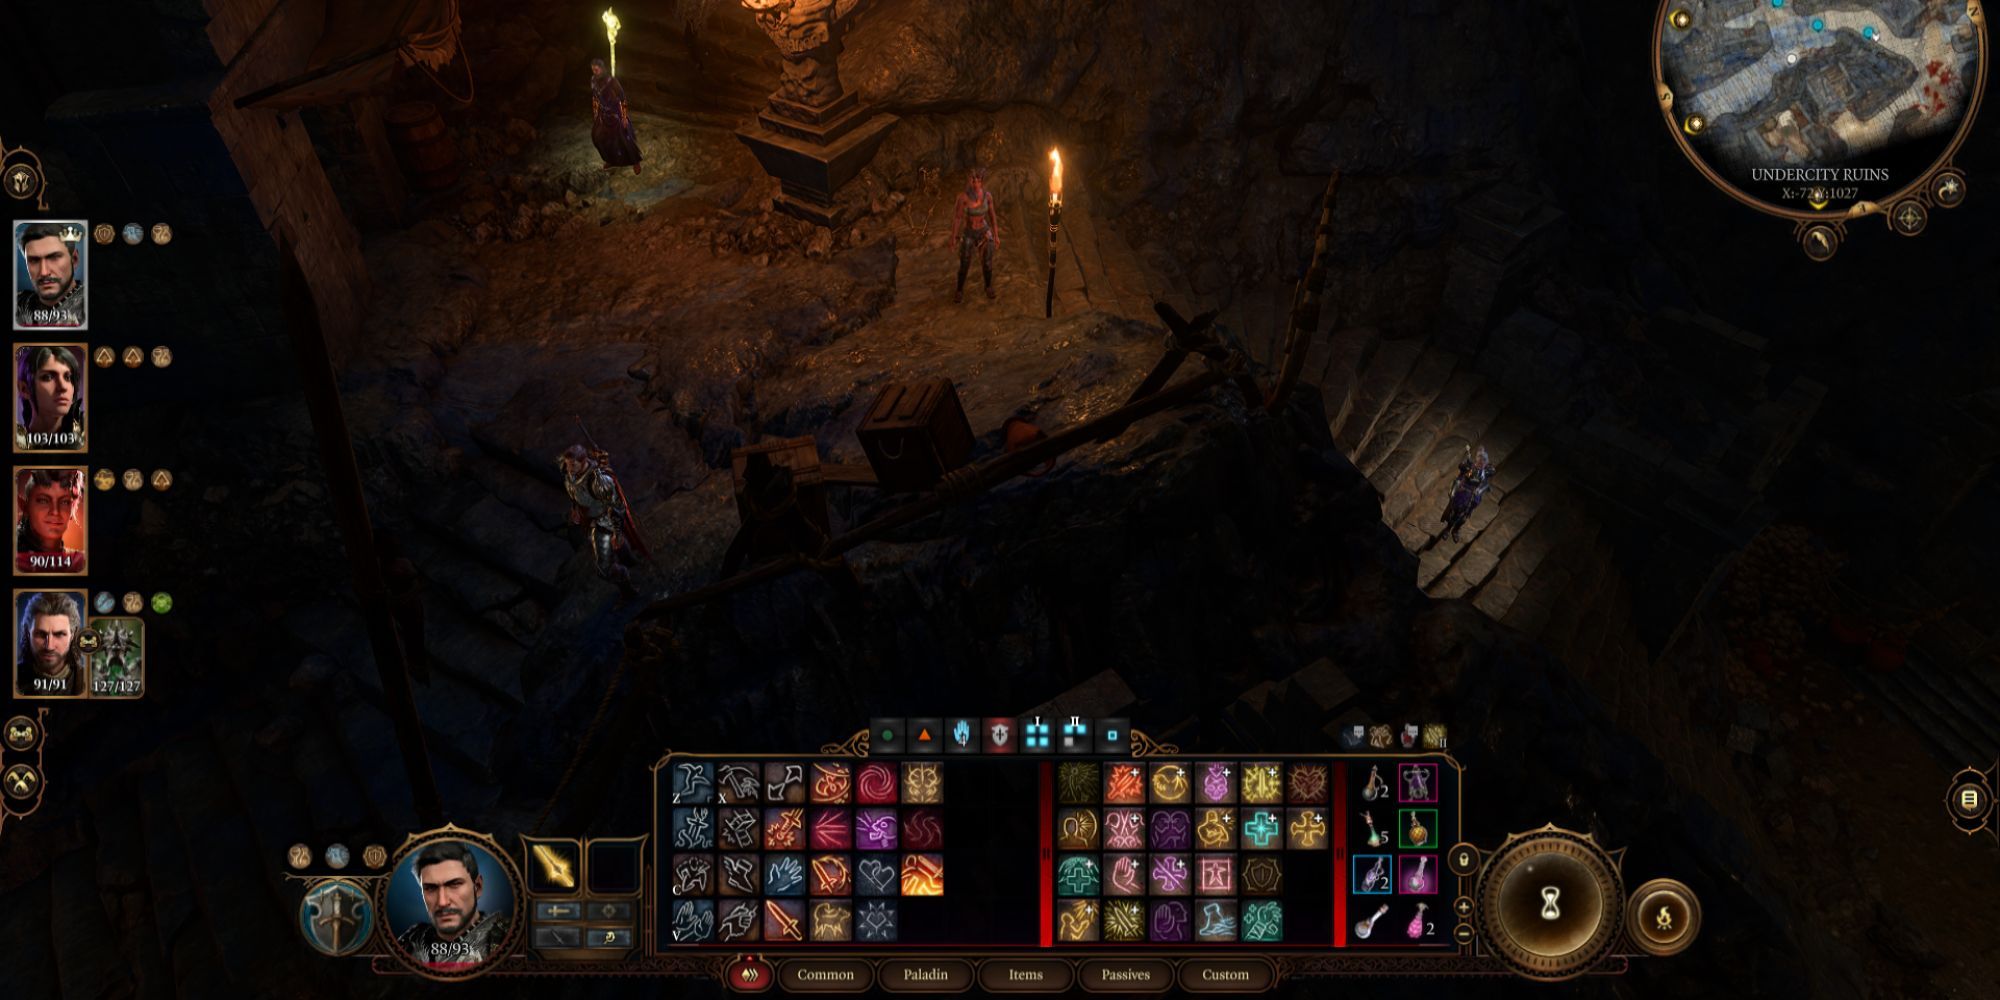 Baldur's Gate 3 On PS5 Is Effectively The Visually Maxed Out PC